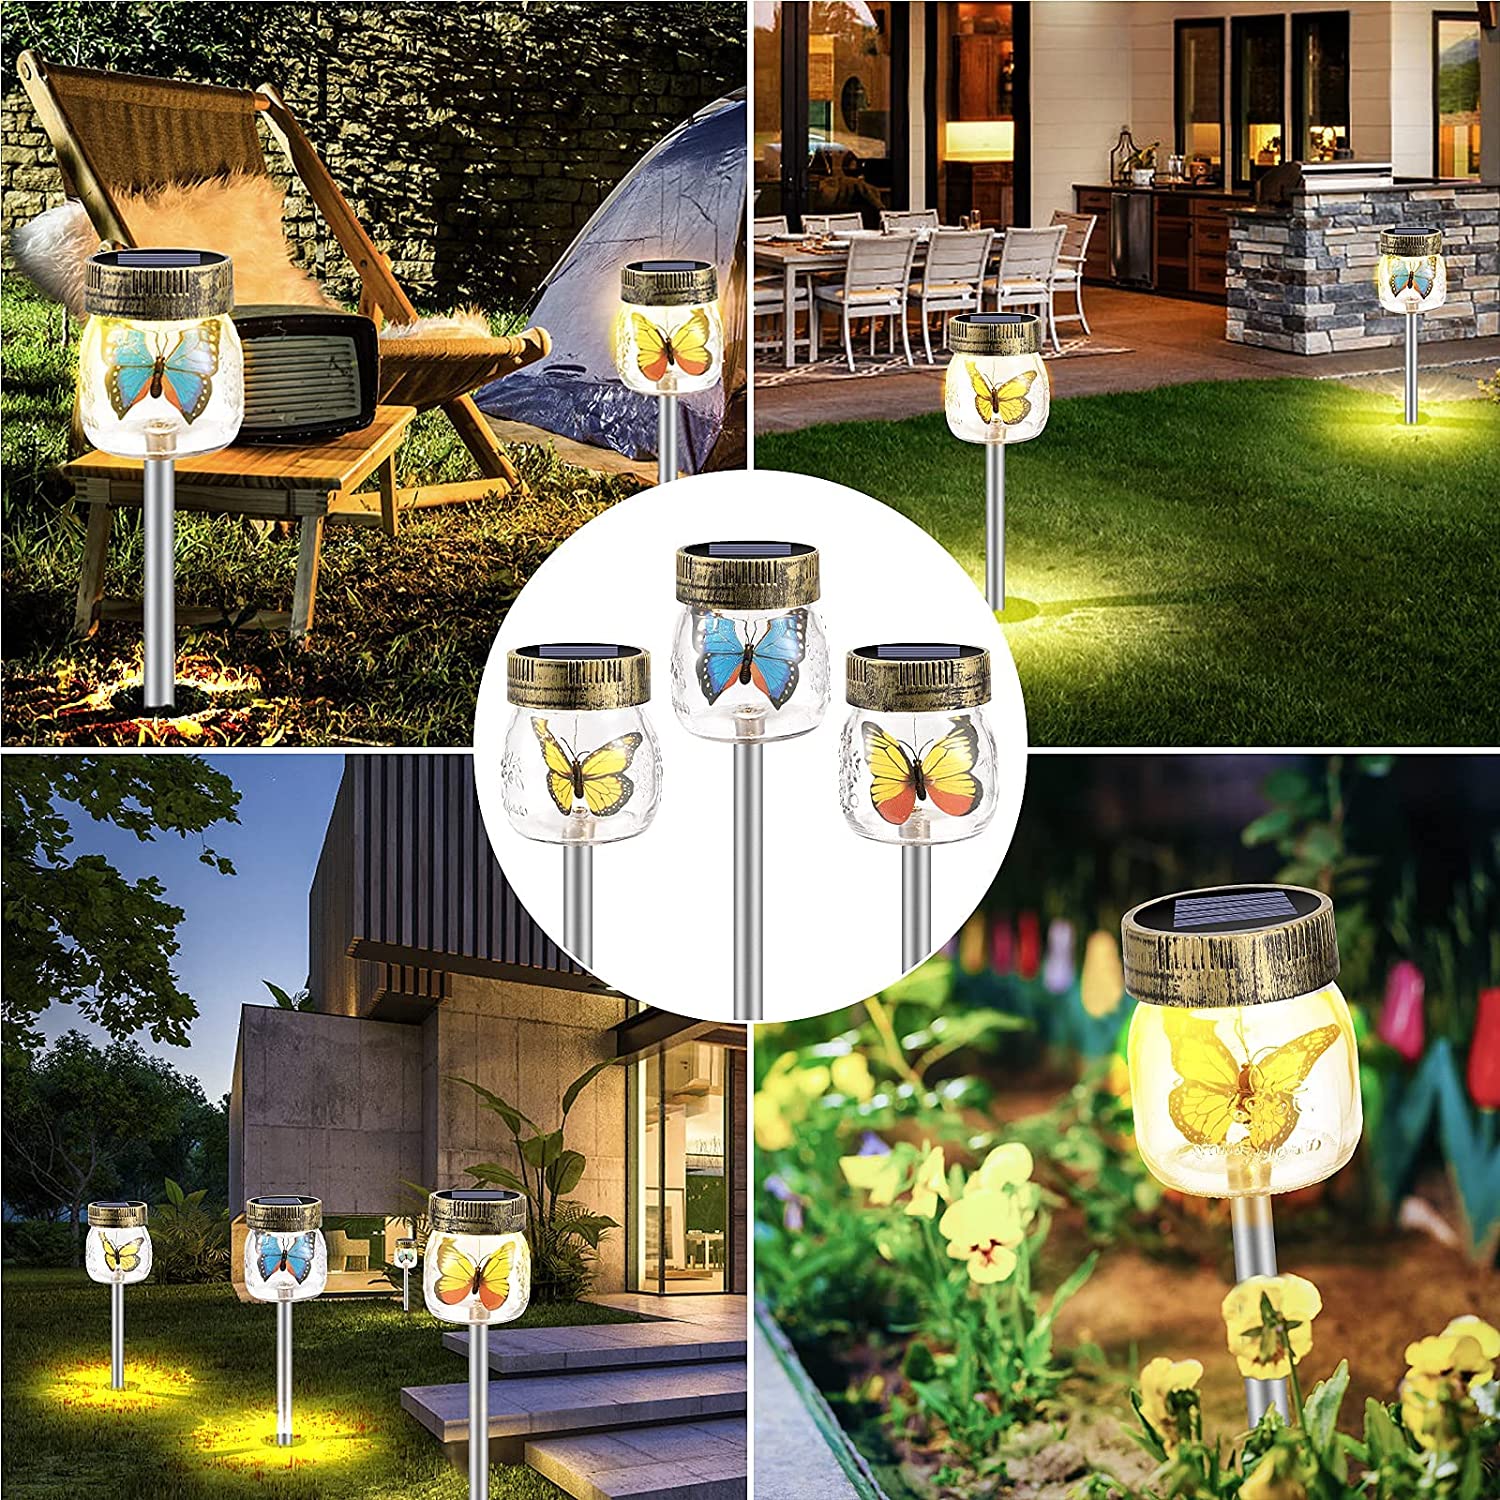 🔥Last Day 75% OFF🎁 Butterfly Glass Solar Lights （Random Color）